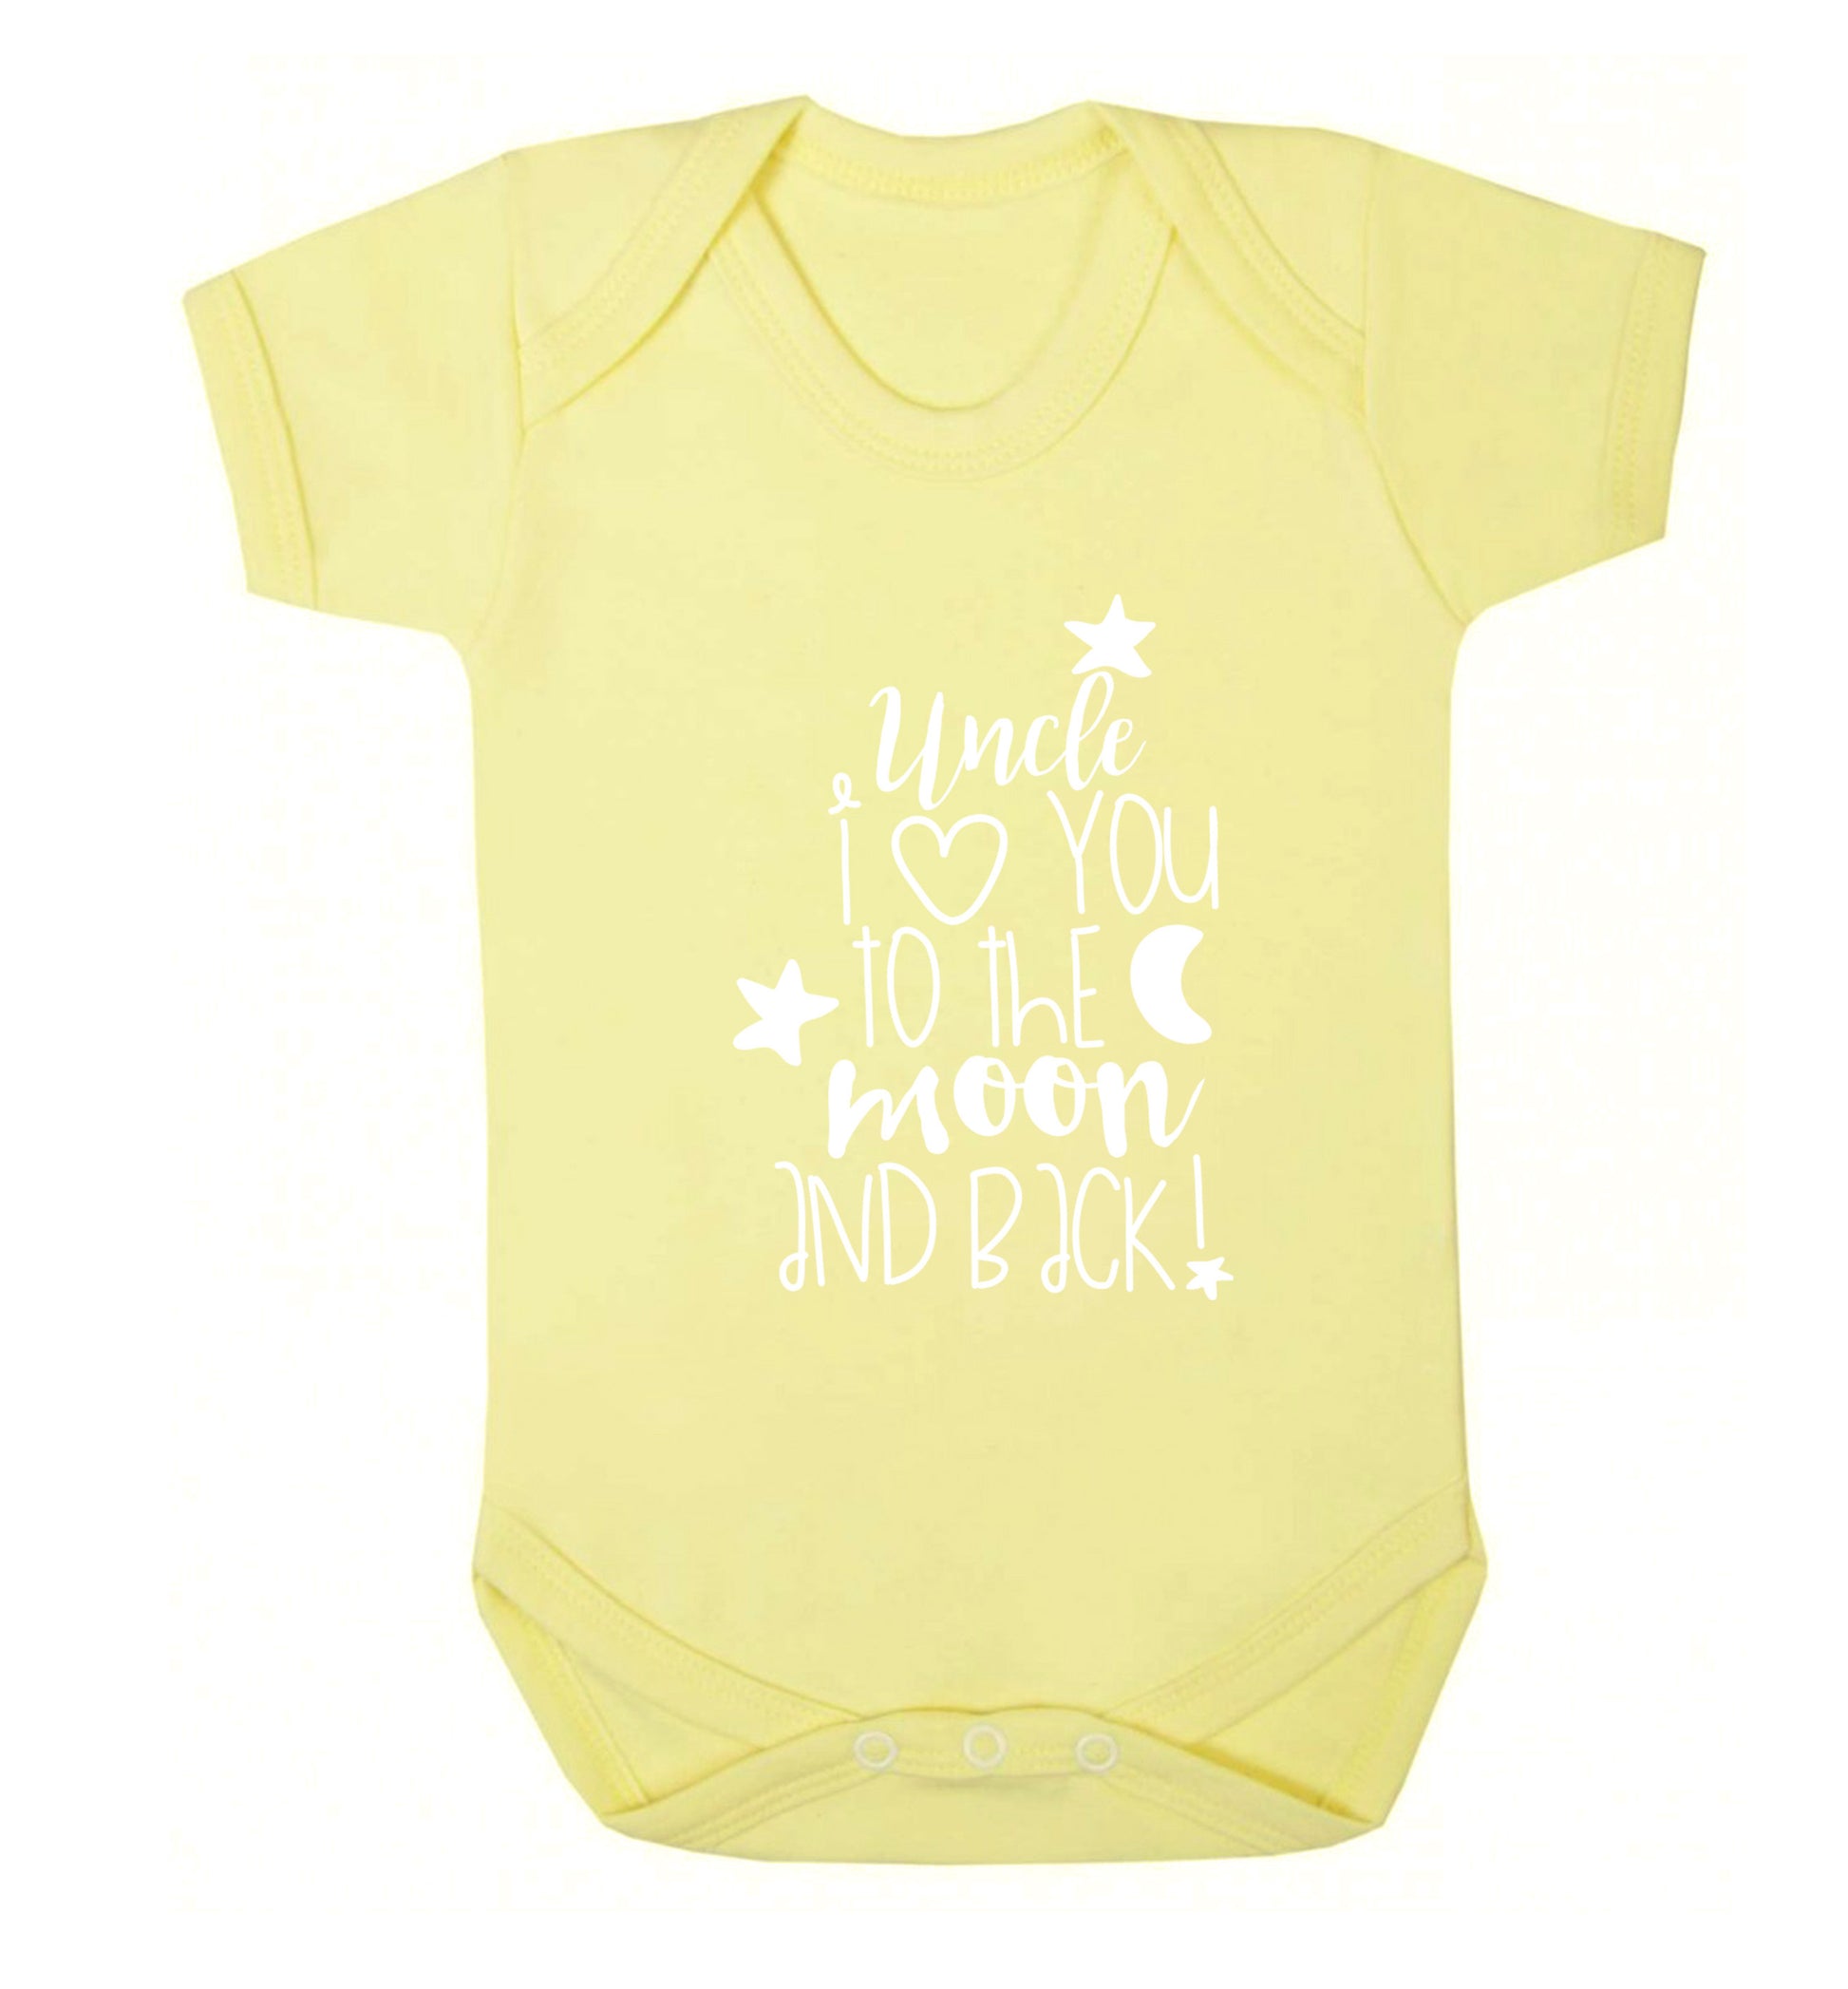 Uncle I love you to the moon and back Baby Vest pale yellow 18-24 months